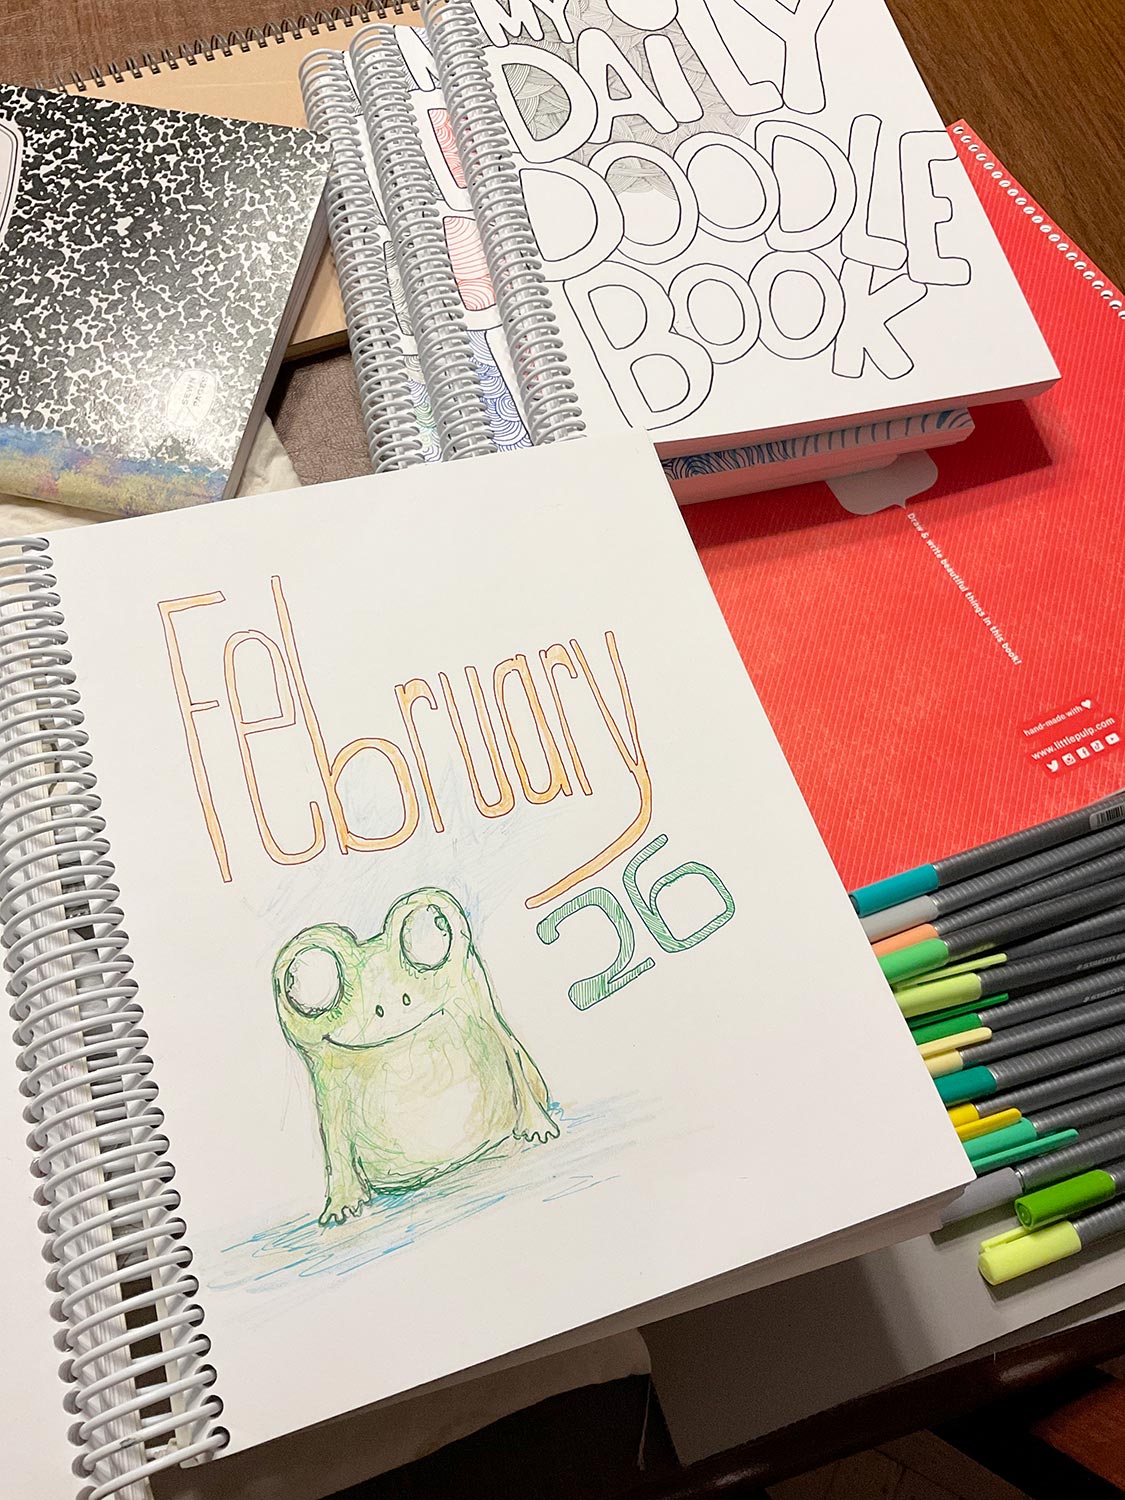 Daily doodle, doodling, frog drawing, my daily doodle book